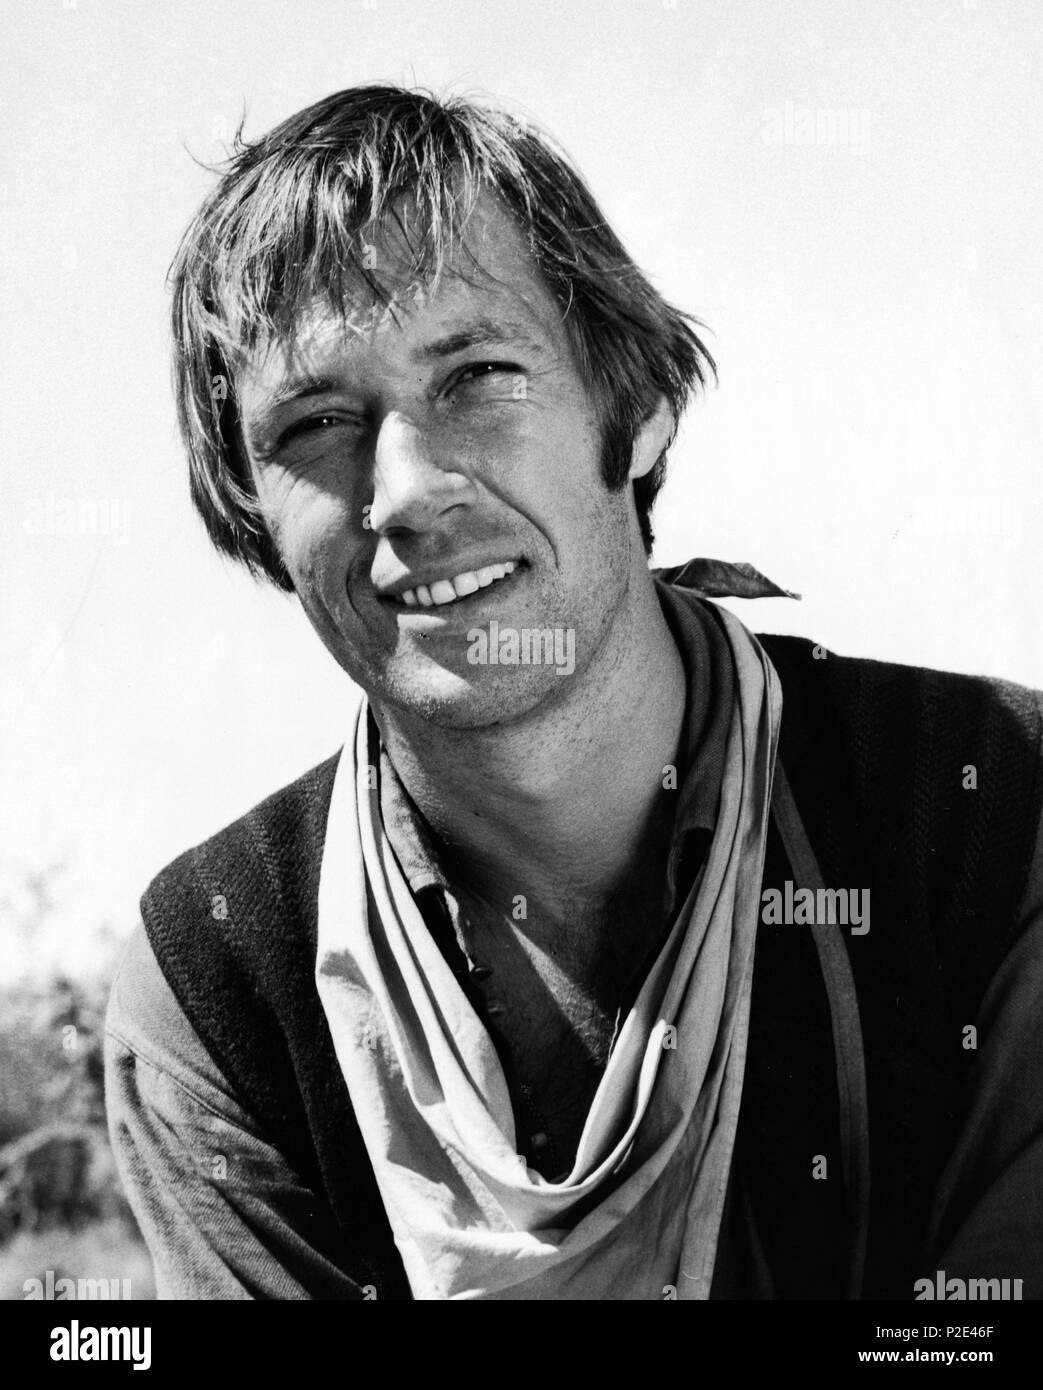 Original Film Title: YOUNG BILLY YOUNG.  English Title: YOUNG BILLY YOUNG.  Film Director: BURT KENNEDY.  Year: 1969.  Stars: DAVID CARRADINE. Credit: UNITED ARTISTS / Album Stock Photo